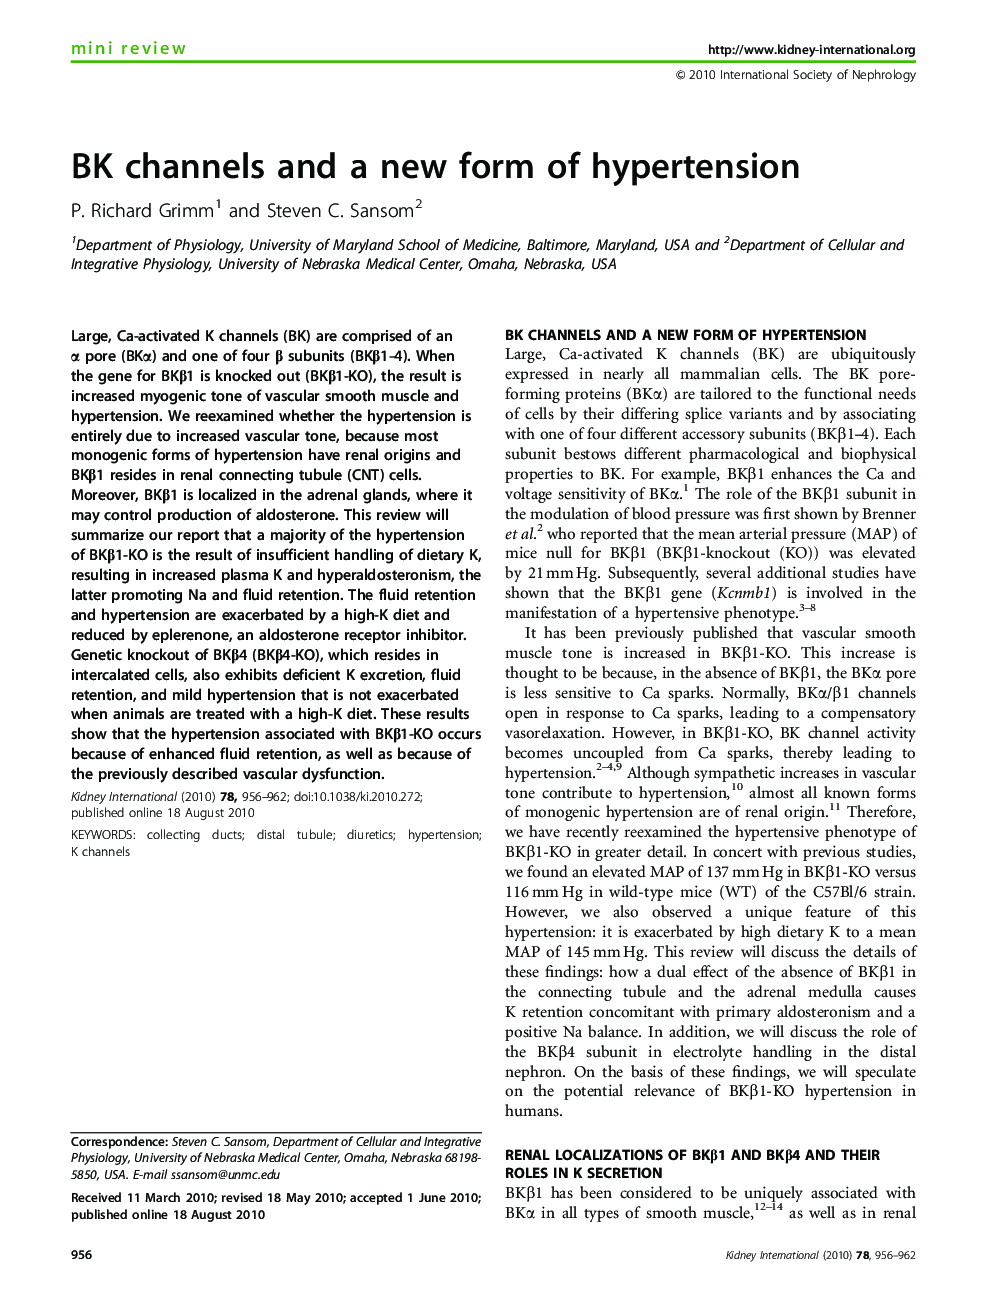 BK channels and a new form of hypertension 